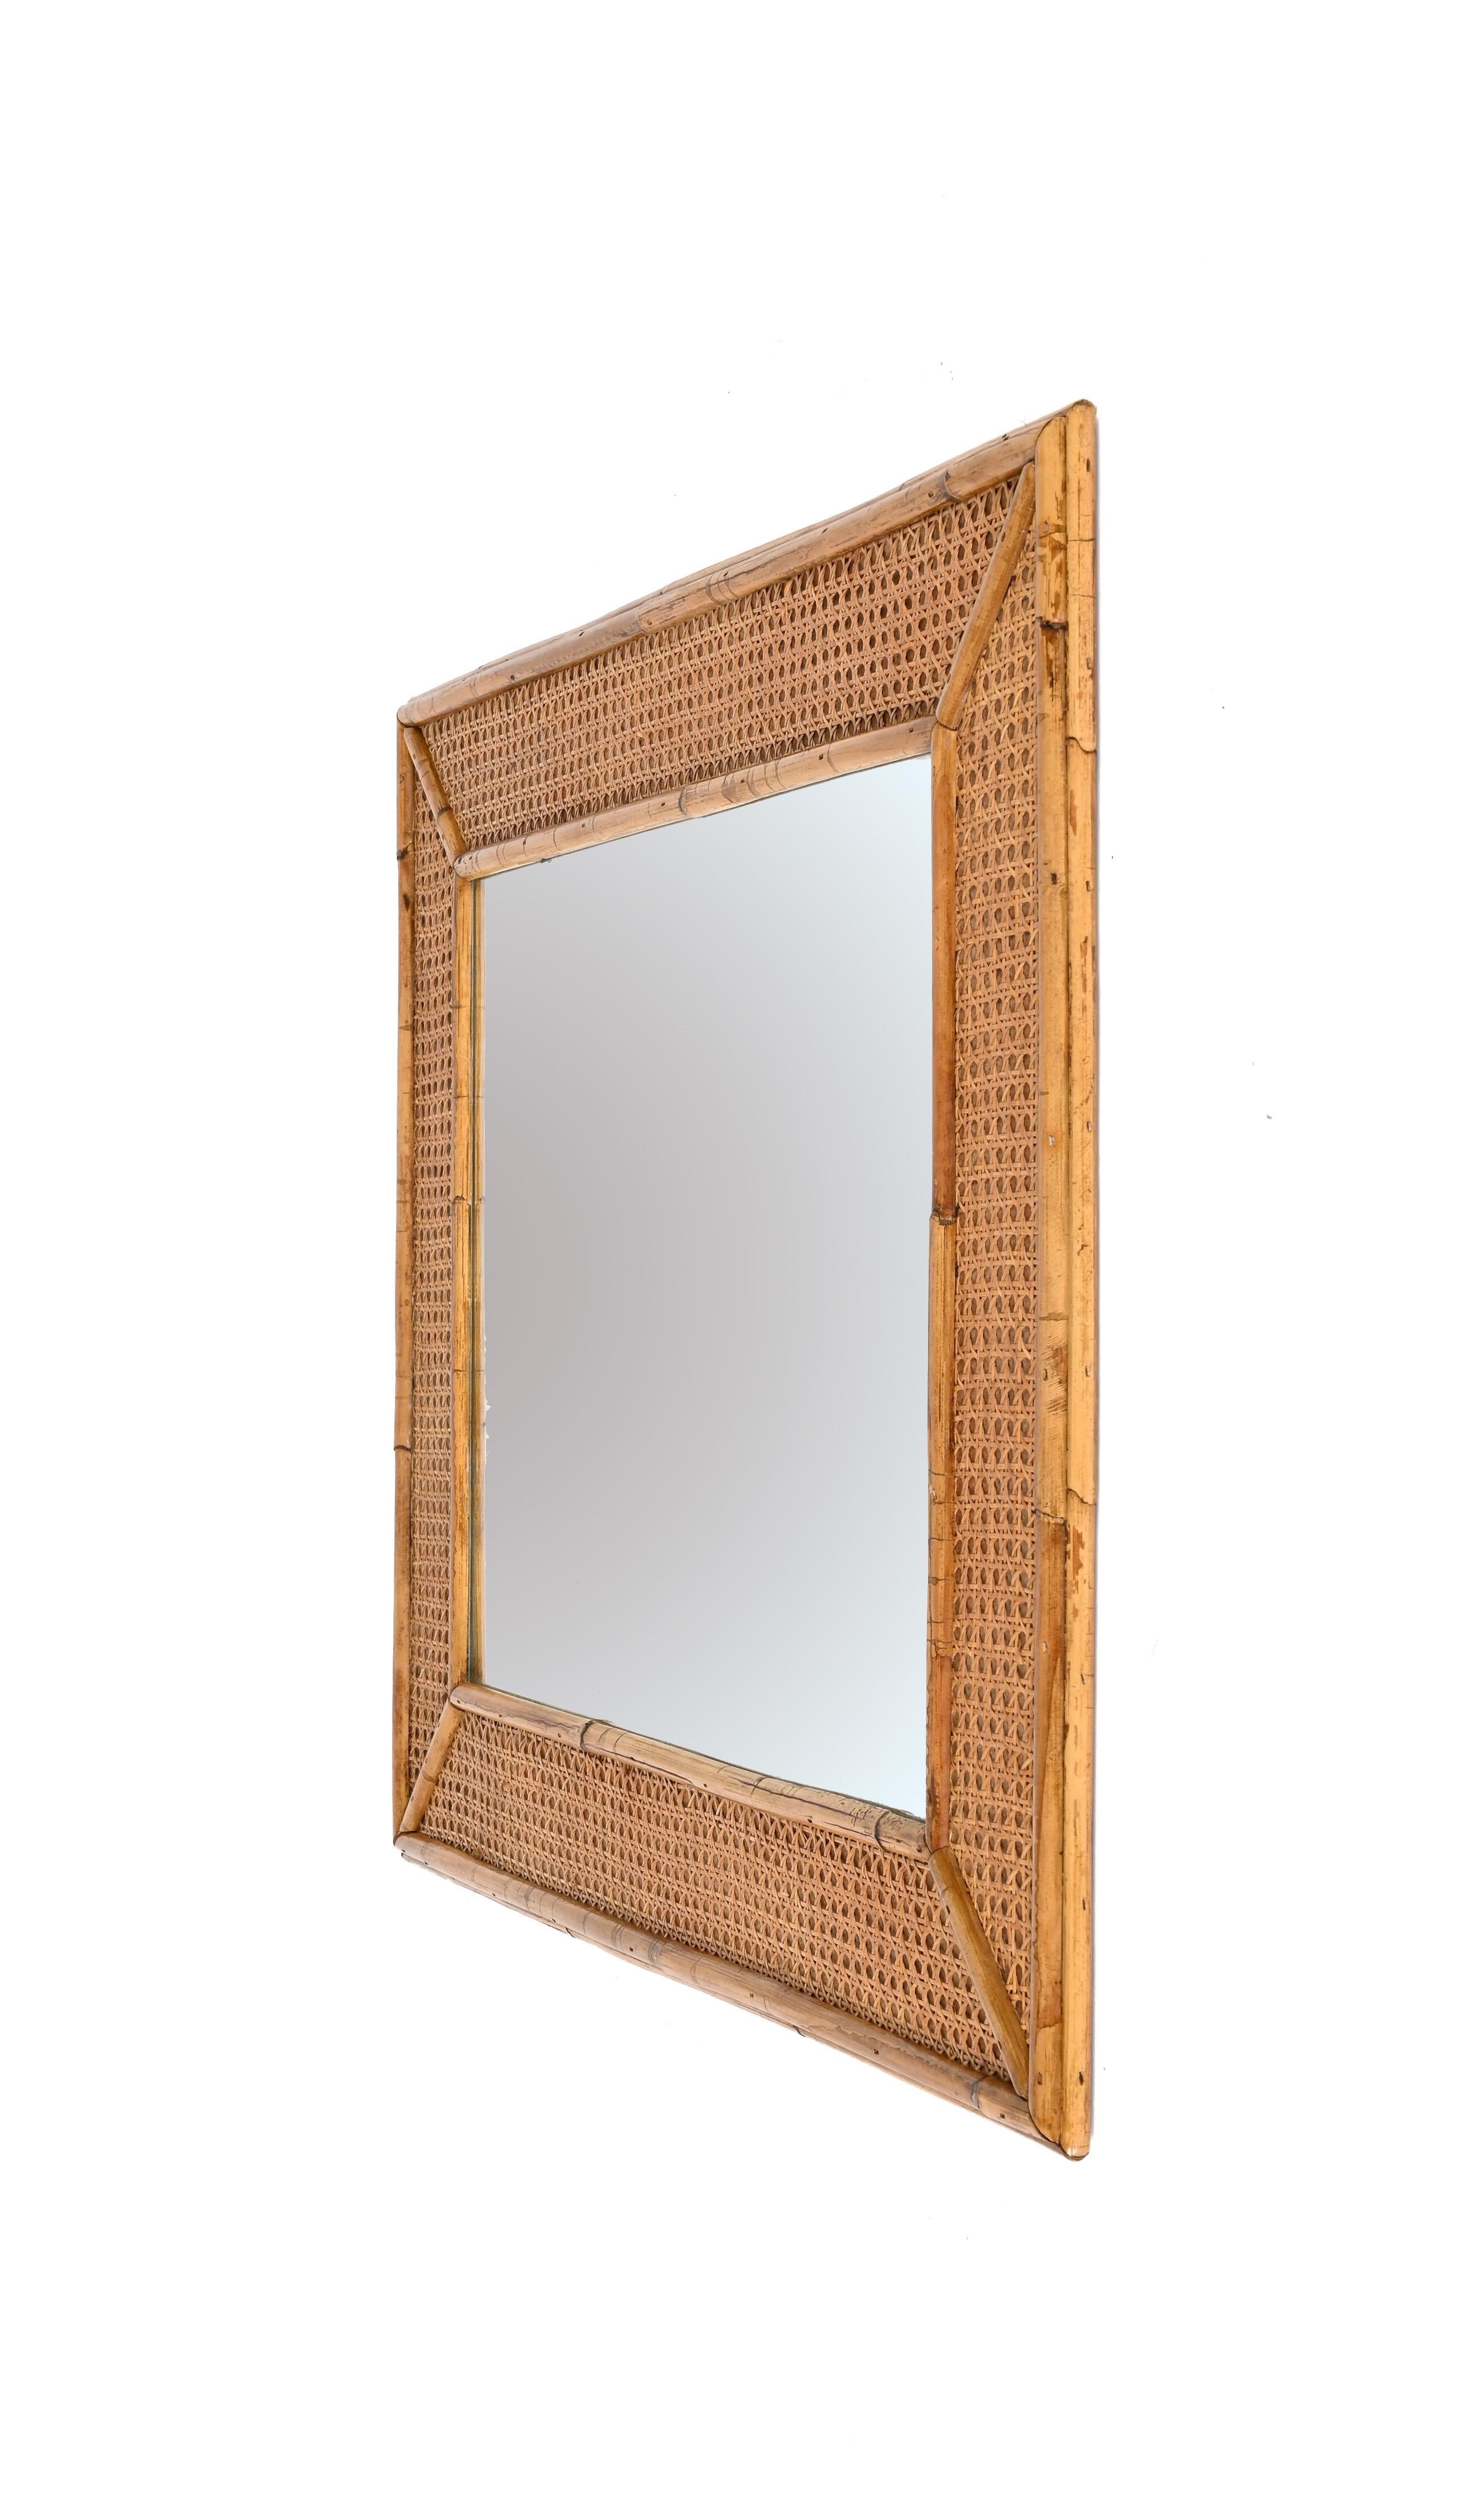 Midcentury Rectangular Italian Mirror with Bamboo and Vienna Straw Frame, 1970s For Sale 11